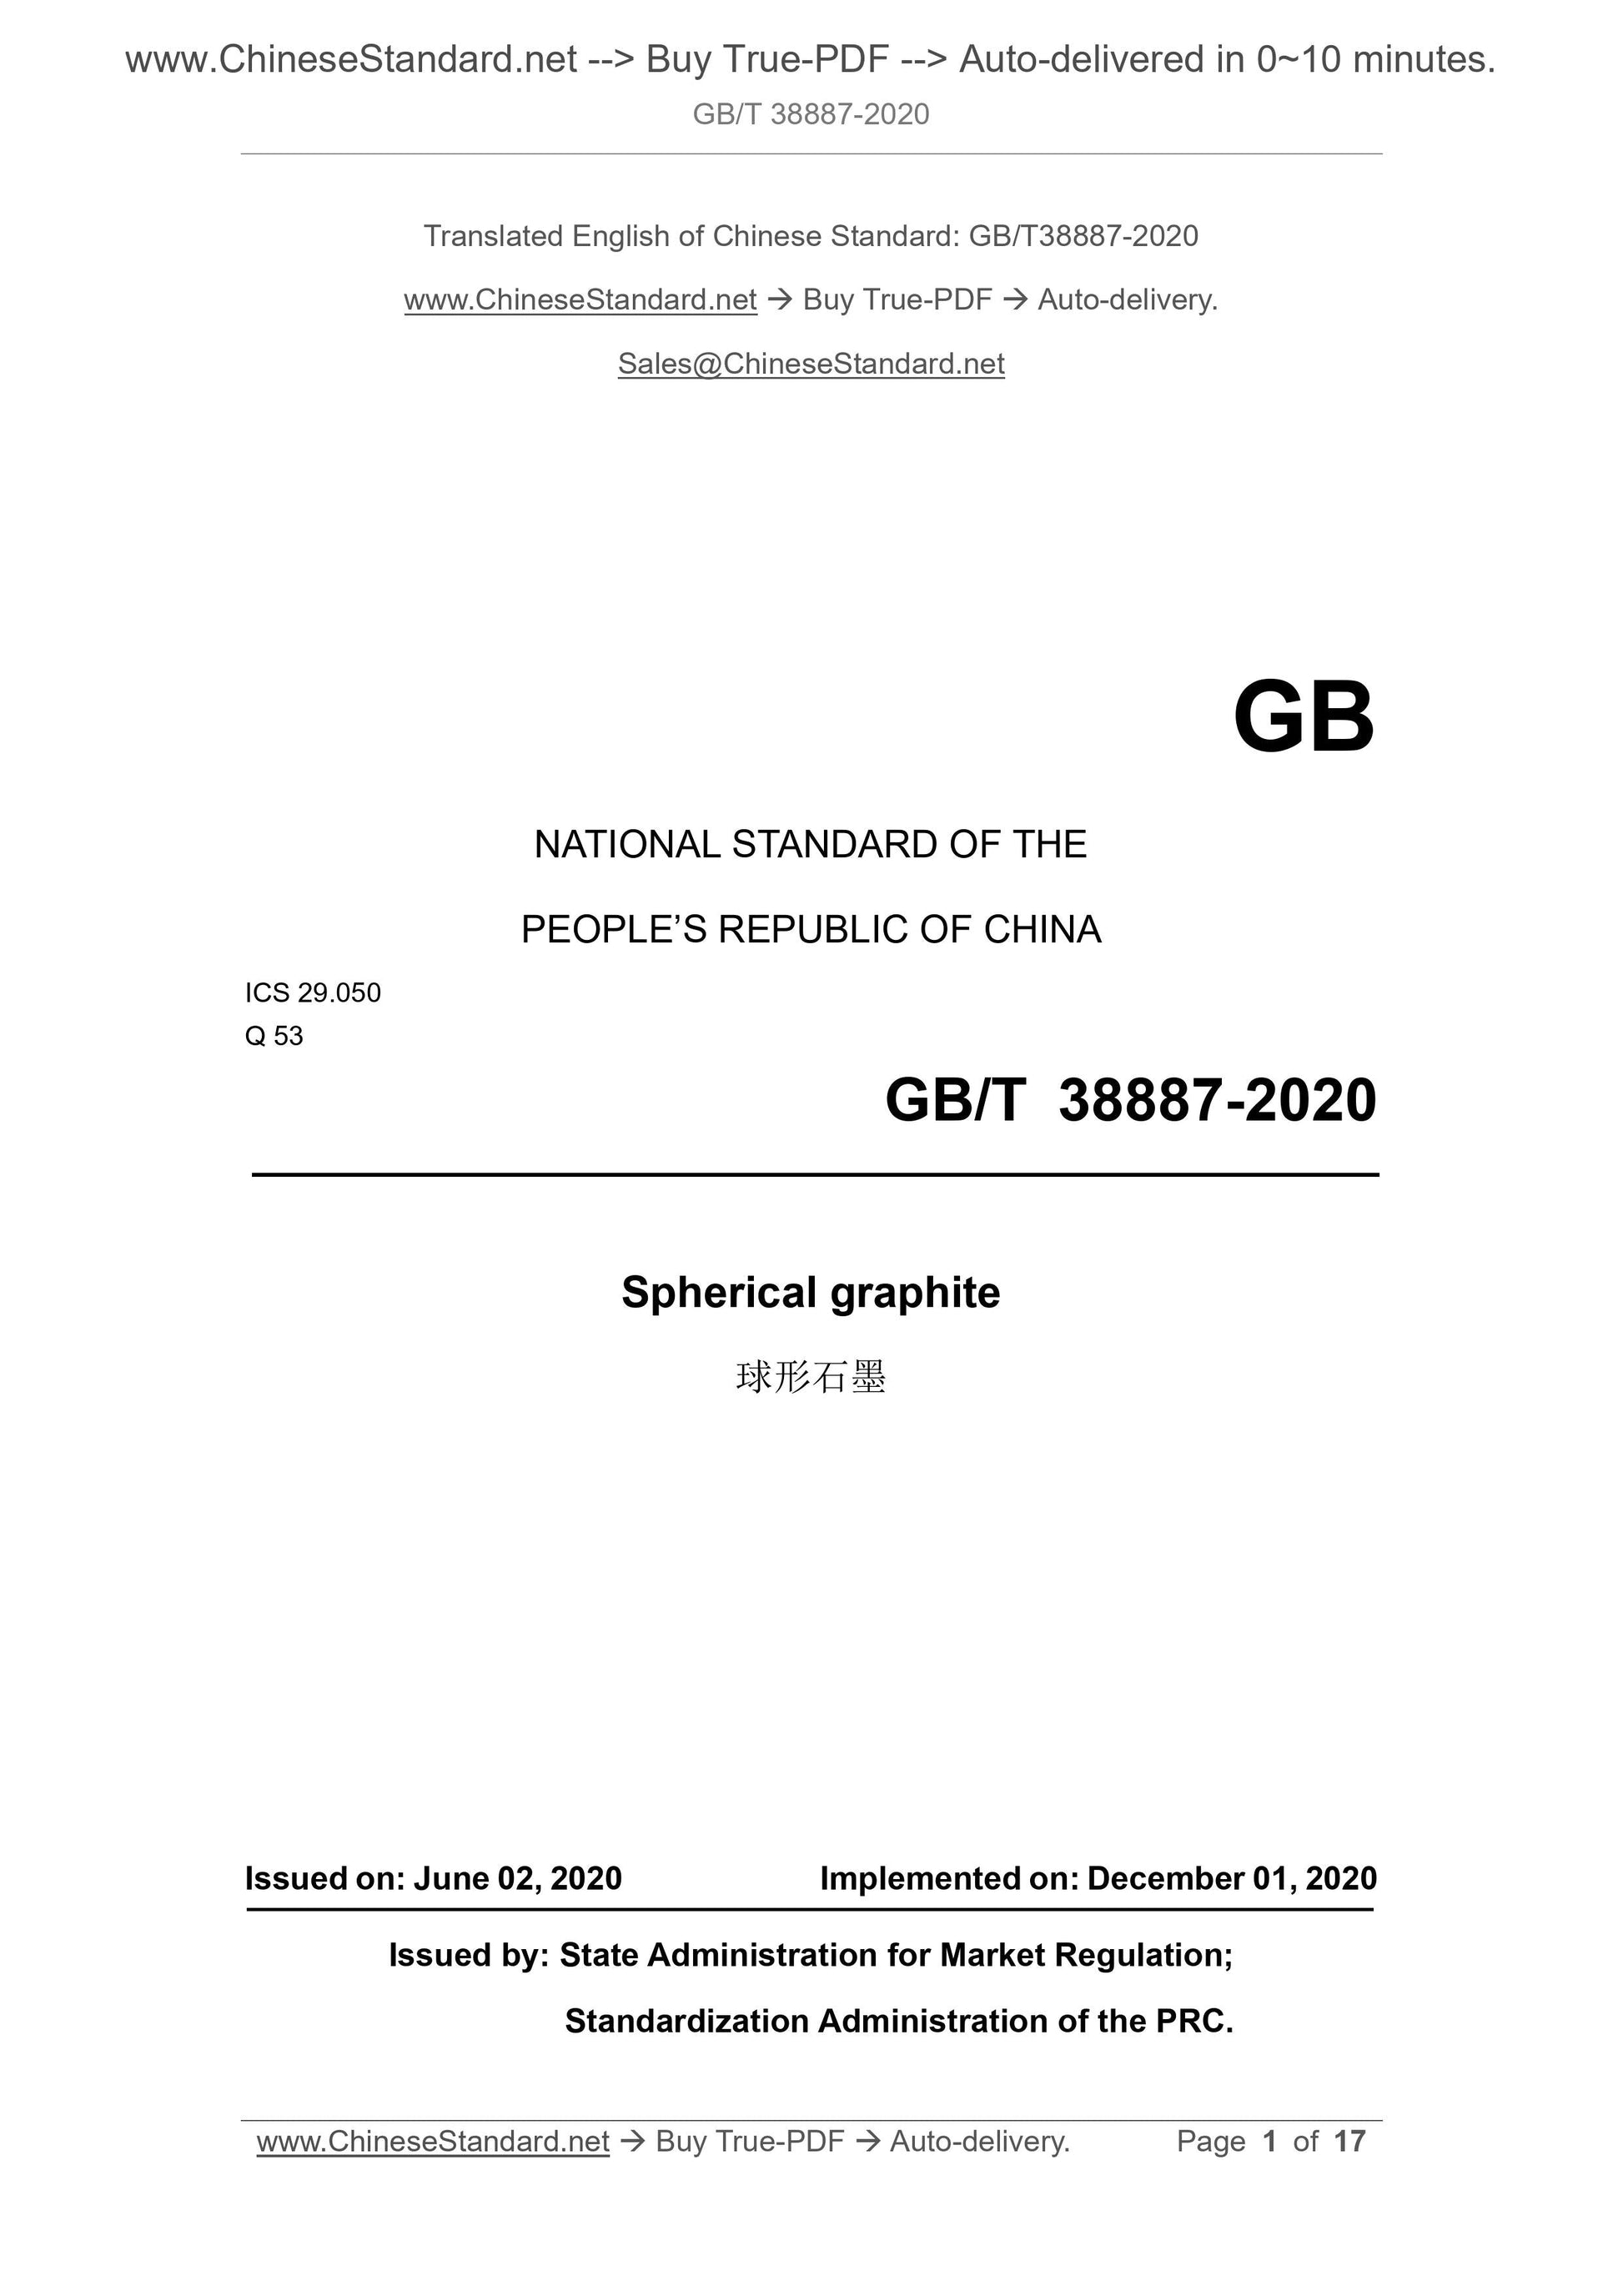 GB/T 38887-2020 Page 1